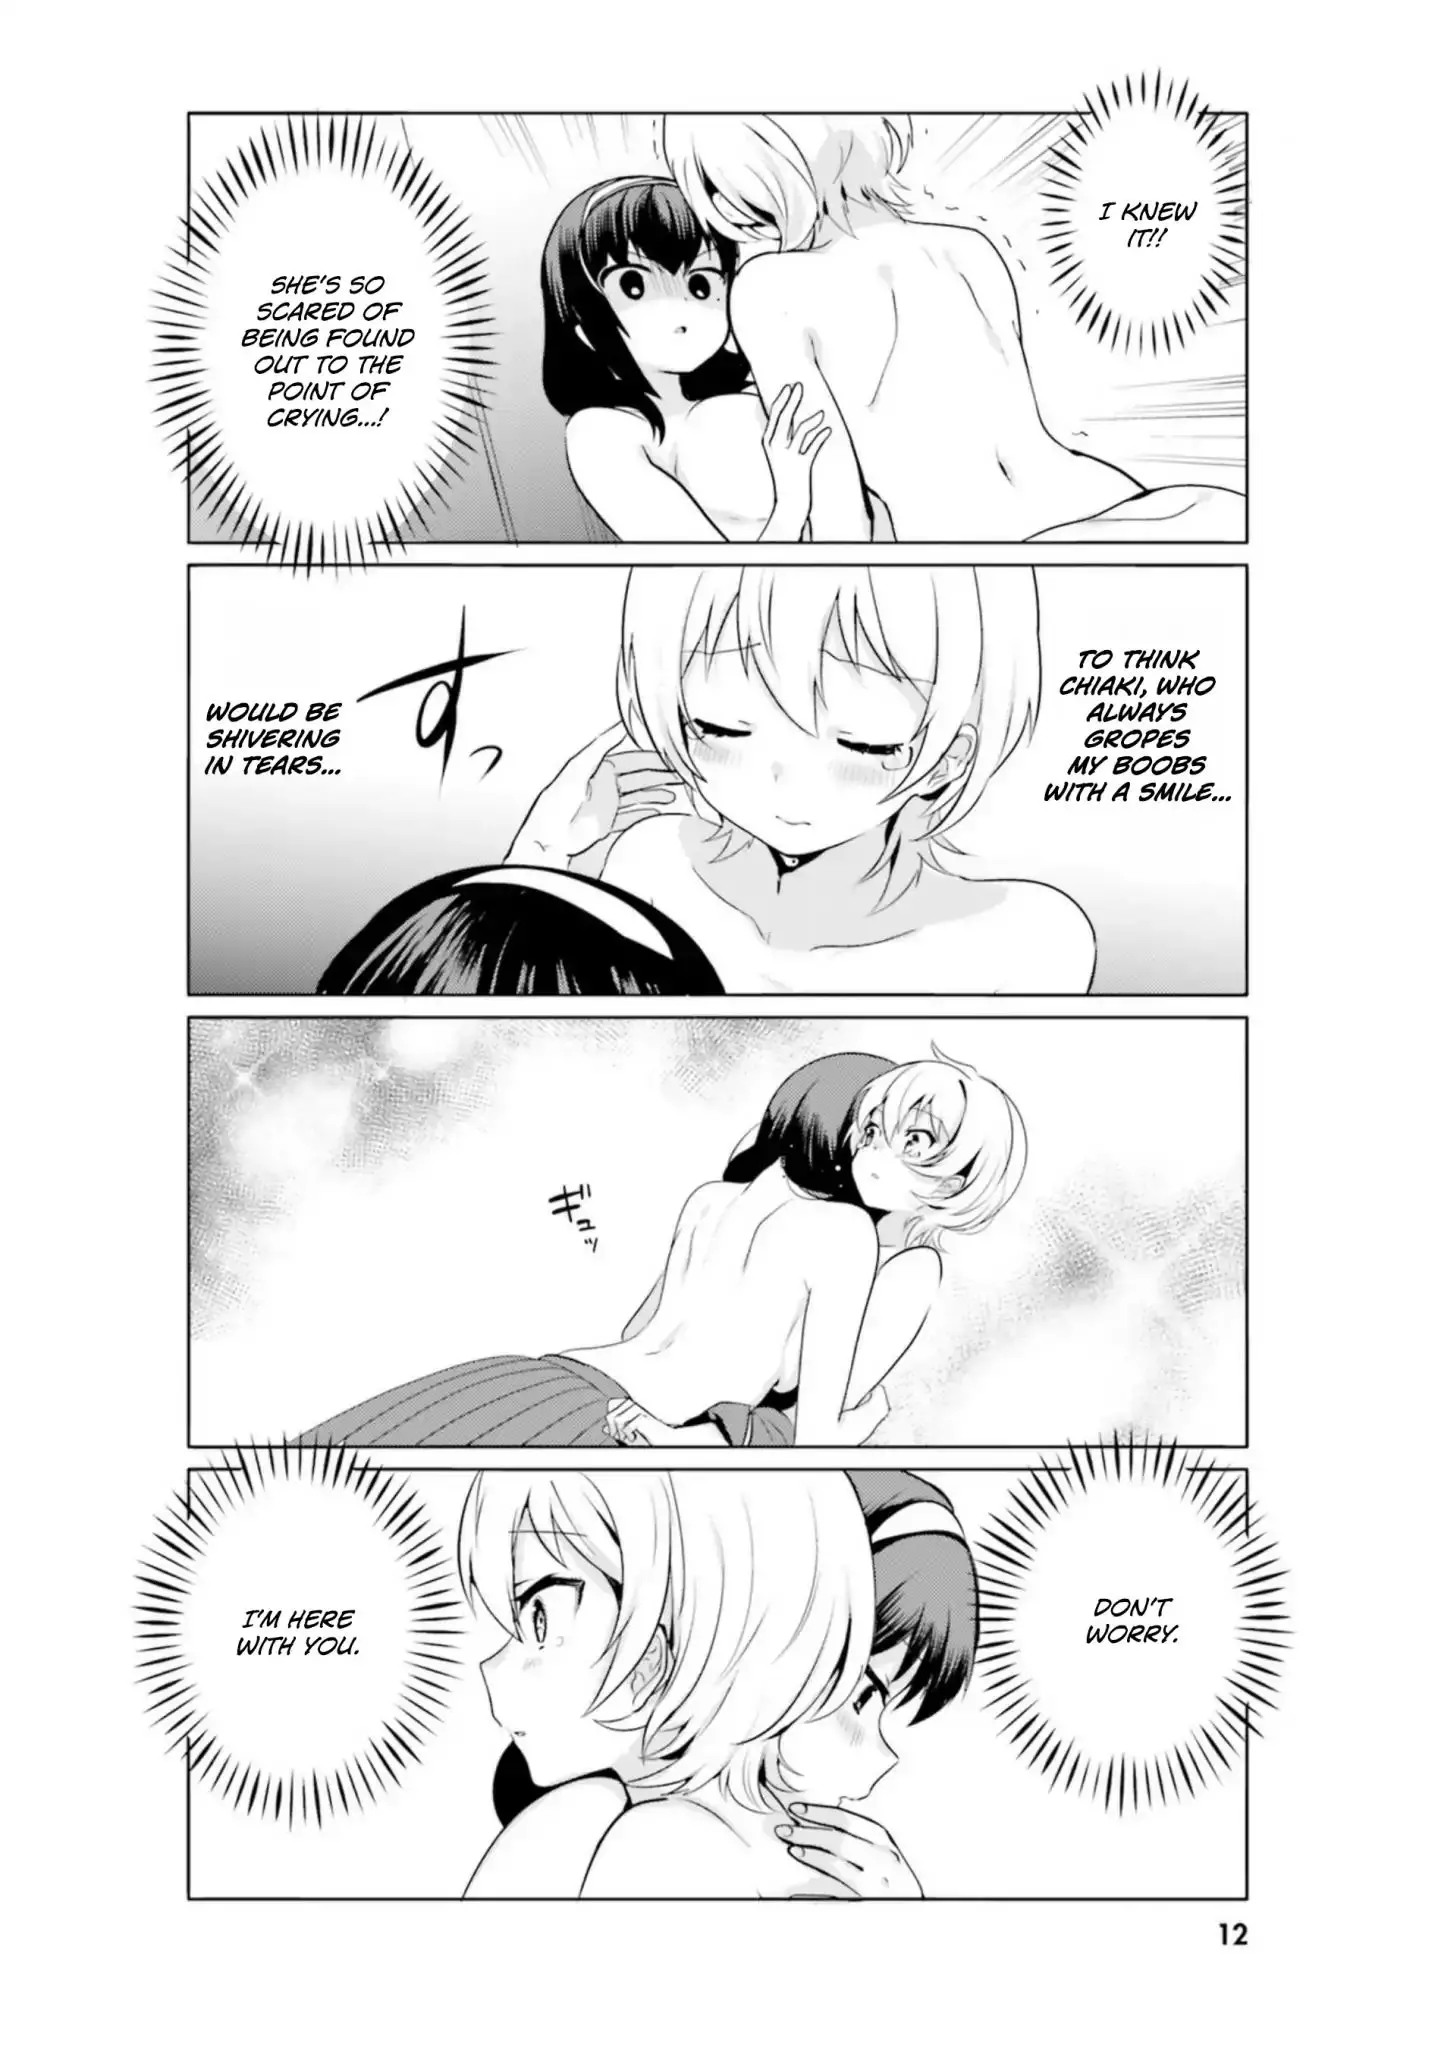 I Like Oppai Best In The World! - 10 page 14